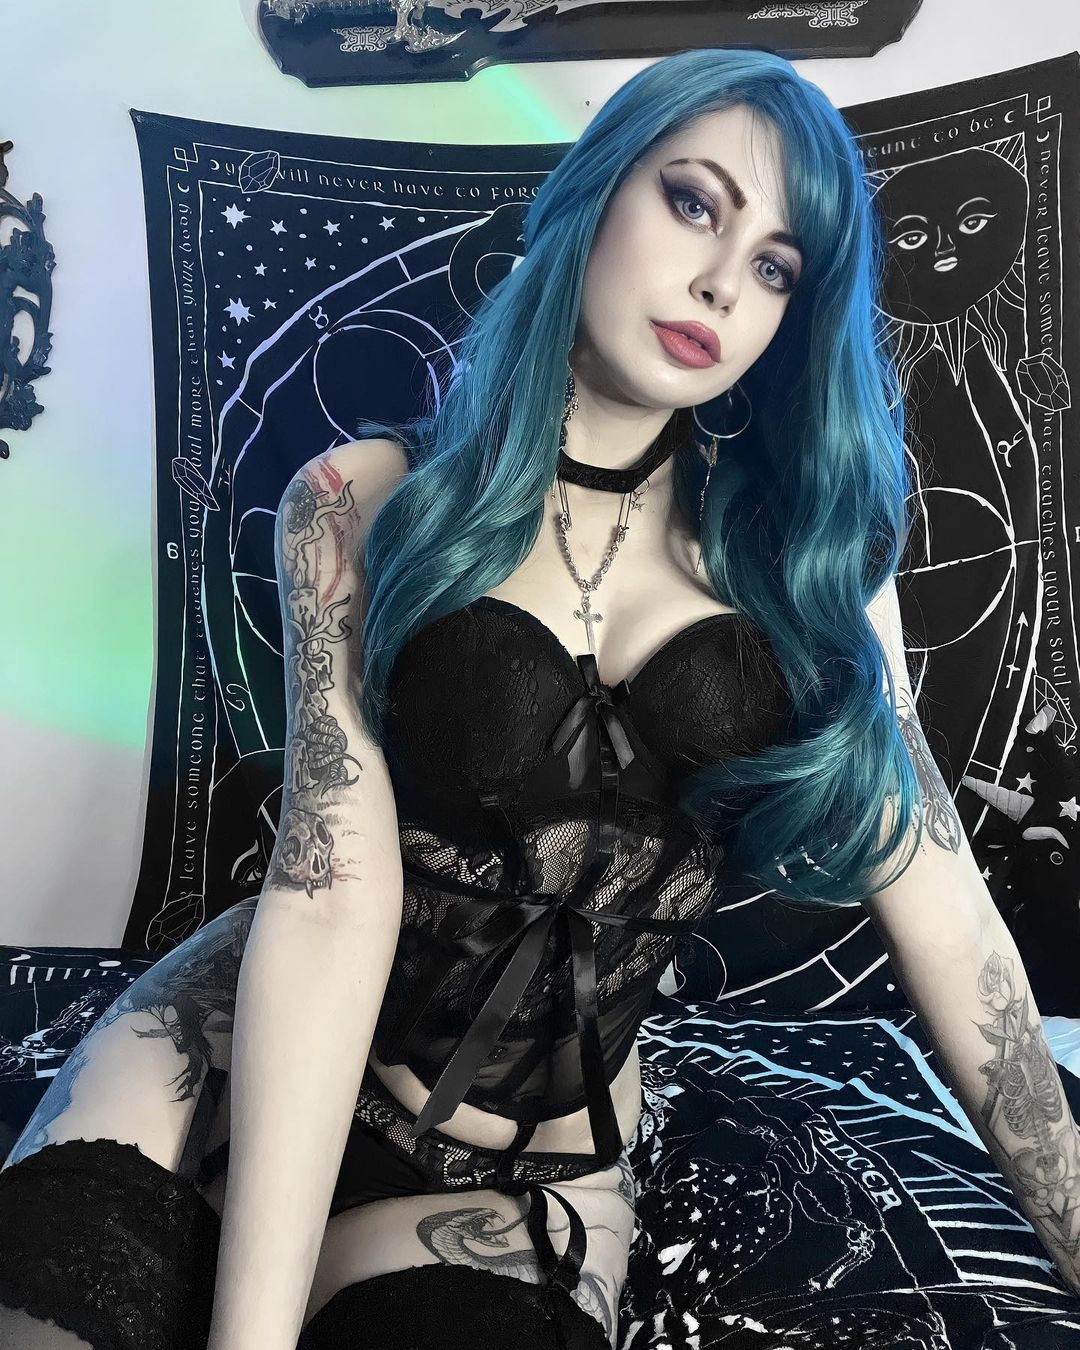 Goth Babes Compilation - NSFW, Goths, Girls, Gothic, A selection, Erotic, Underwear, Girl with tattoo, Neckline, Longpost